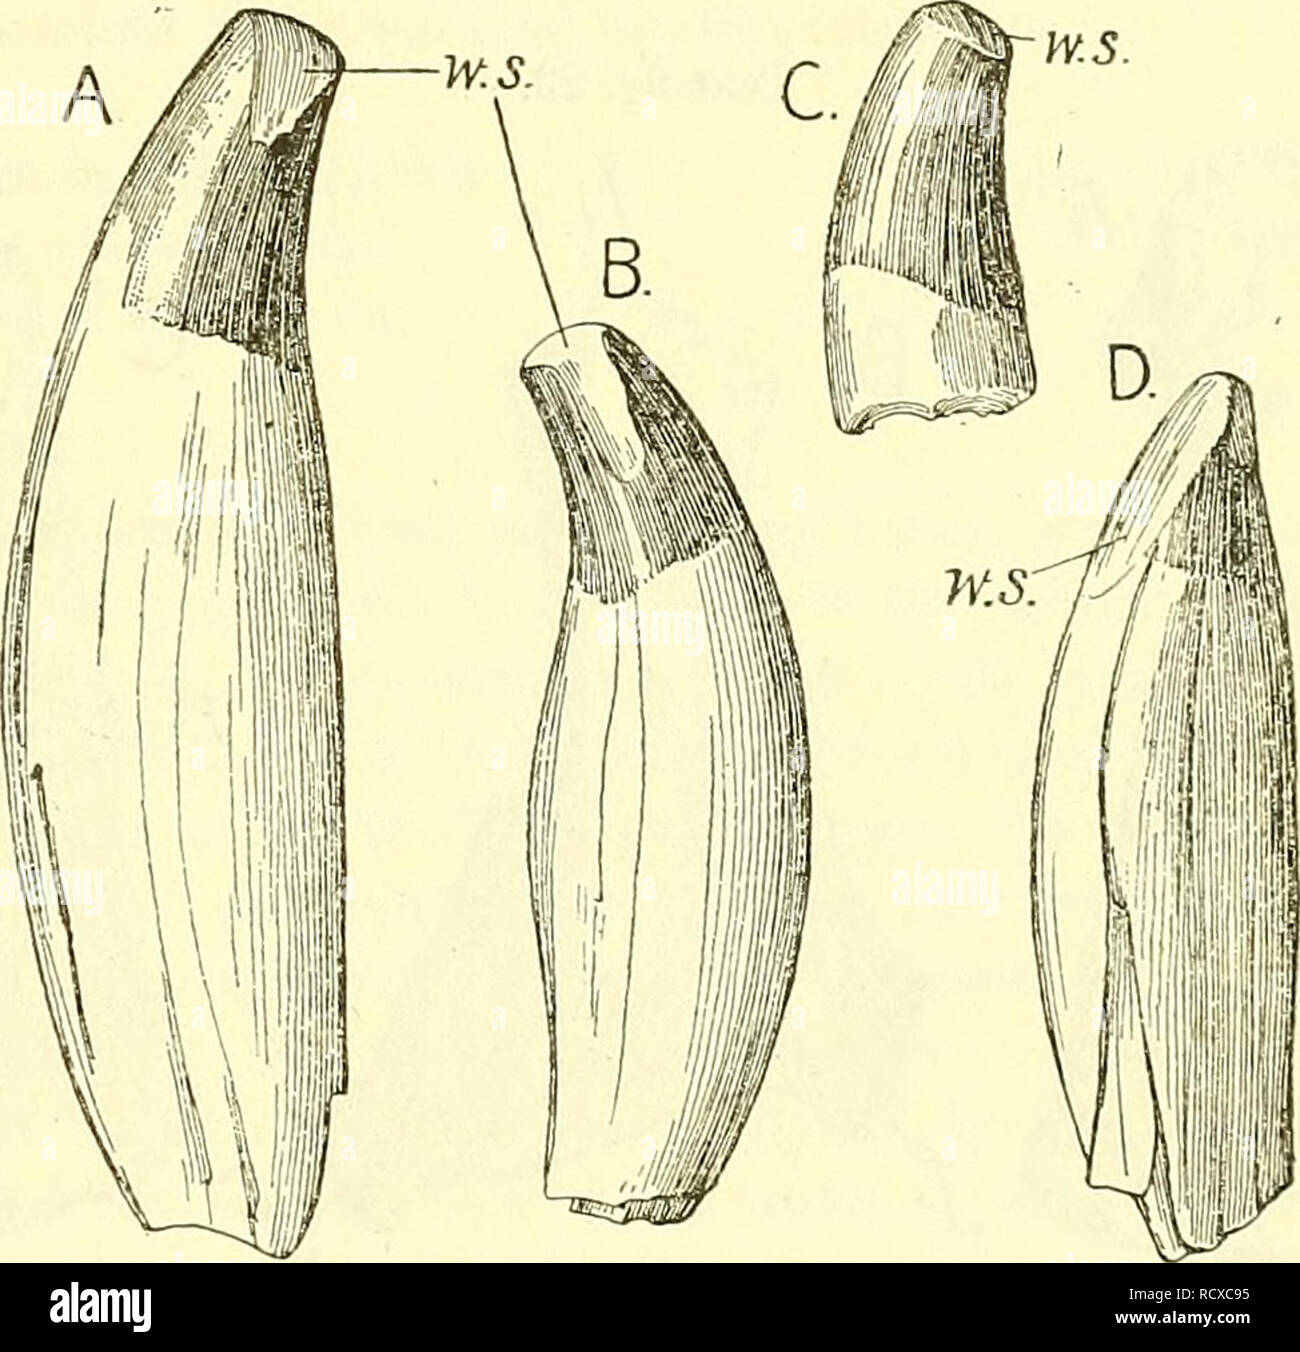 . A descriptive catalogue of the marine reptiles of the Oxford clay. Based on the Leeds Collection in the British Museum (Natural History), London ... Reptiles, Fossil. PELONEUSTES EVANSI. to the inner side of the teeth in use seems to show that the normal tooth-replacement was in operation. The atlas and axis of this specimen, allowing for crushing and fracture, are similar to the atlas and axis of the type specimen described and figured by Seeley in Quart. Journ. Geol. Soc. vol. xxxiii. (1877) p. 716, figs. 1 &amp; 2. The centra of the other cervicals are also like that of the fourth cervica Stock Photo